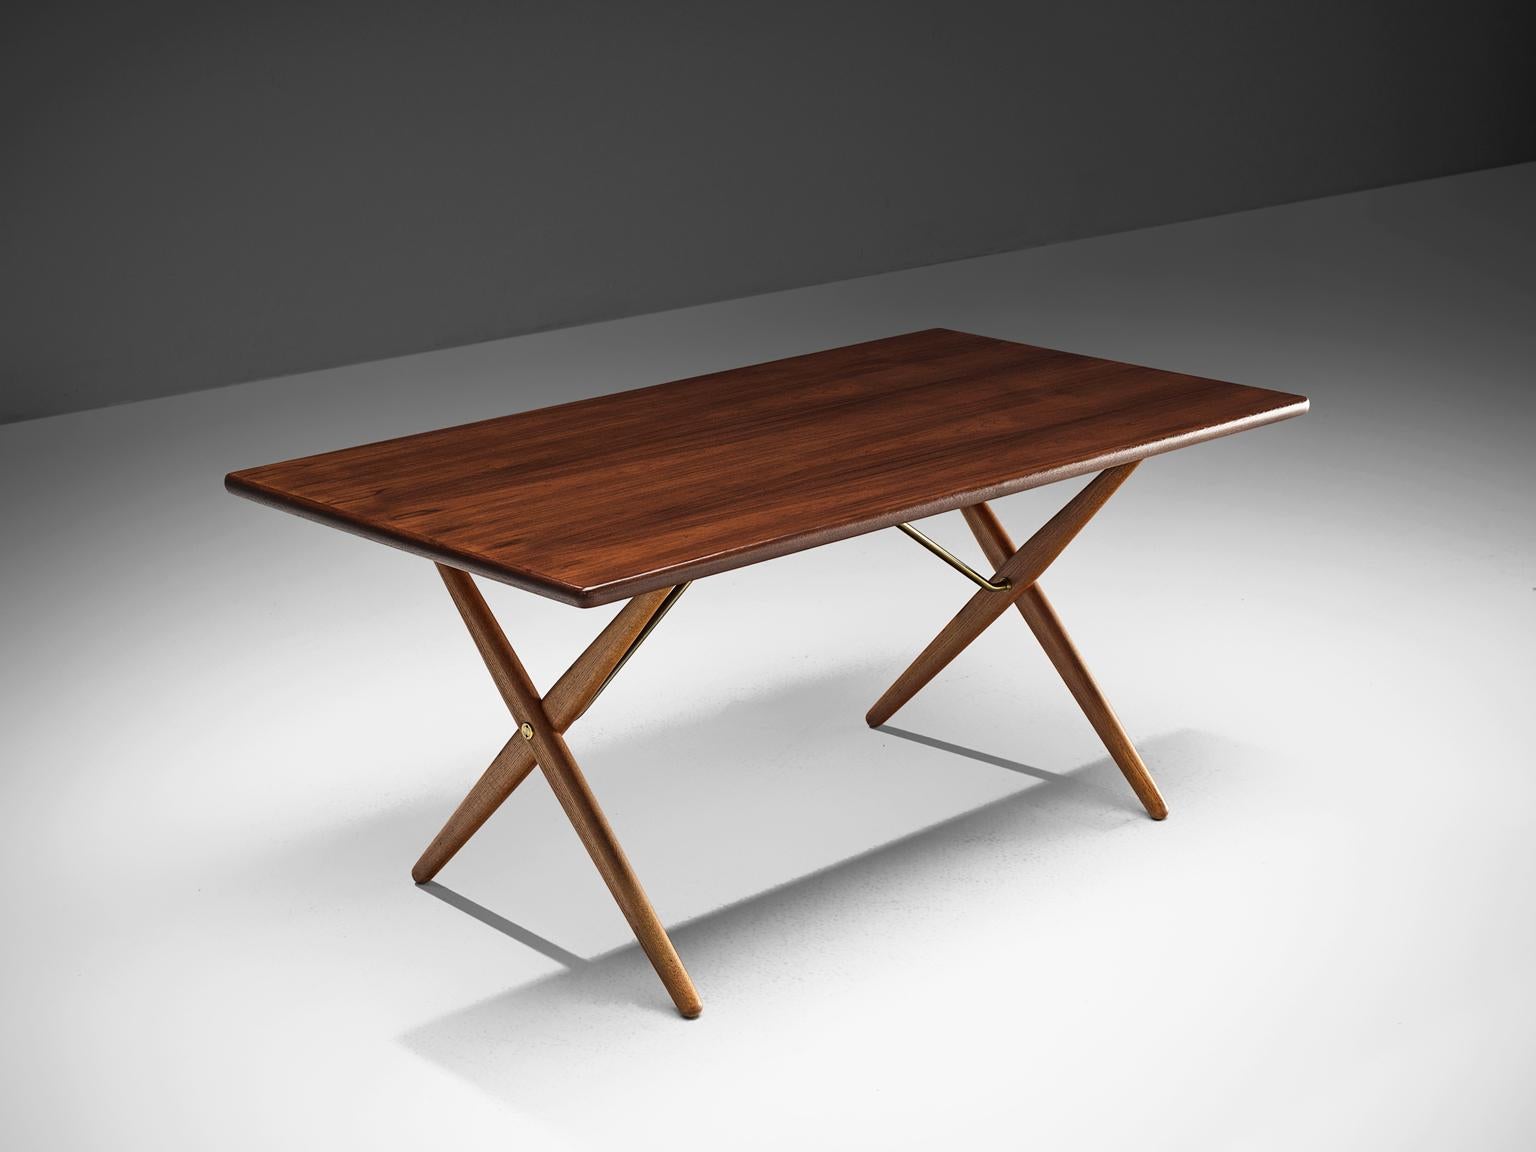 Hans J. Wegner for Andreas Tuck, table model AT-303, teak, oak and metal, Denmark, 1955.

Dining table with elegant X-shaped legs by Hans Wegner. This table is considered as one of the best known designs from Wenger. From a distance, this table,